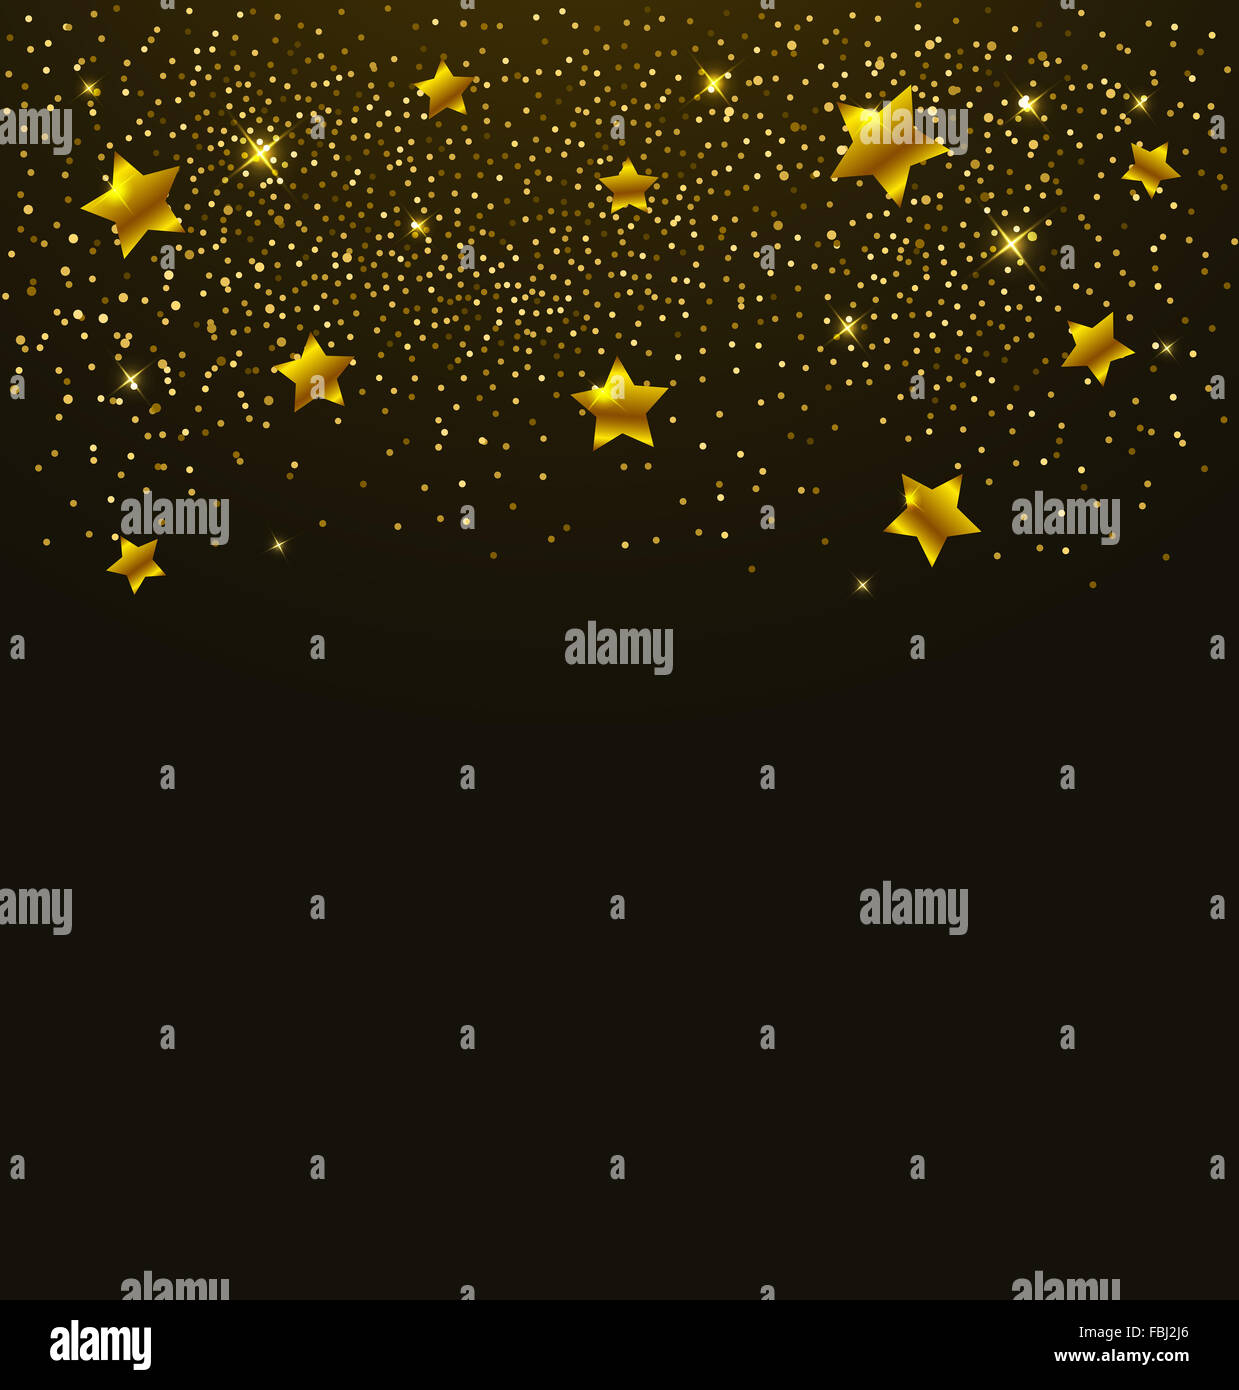 Abstract background with golden shining stars Stock Photo